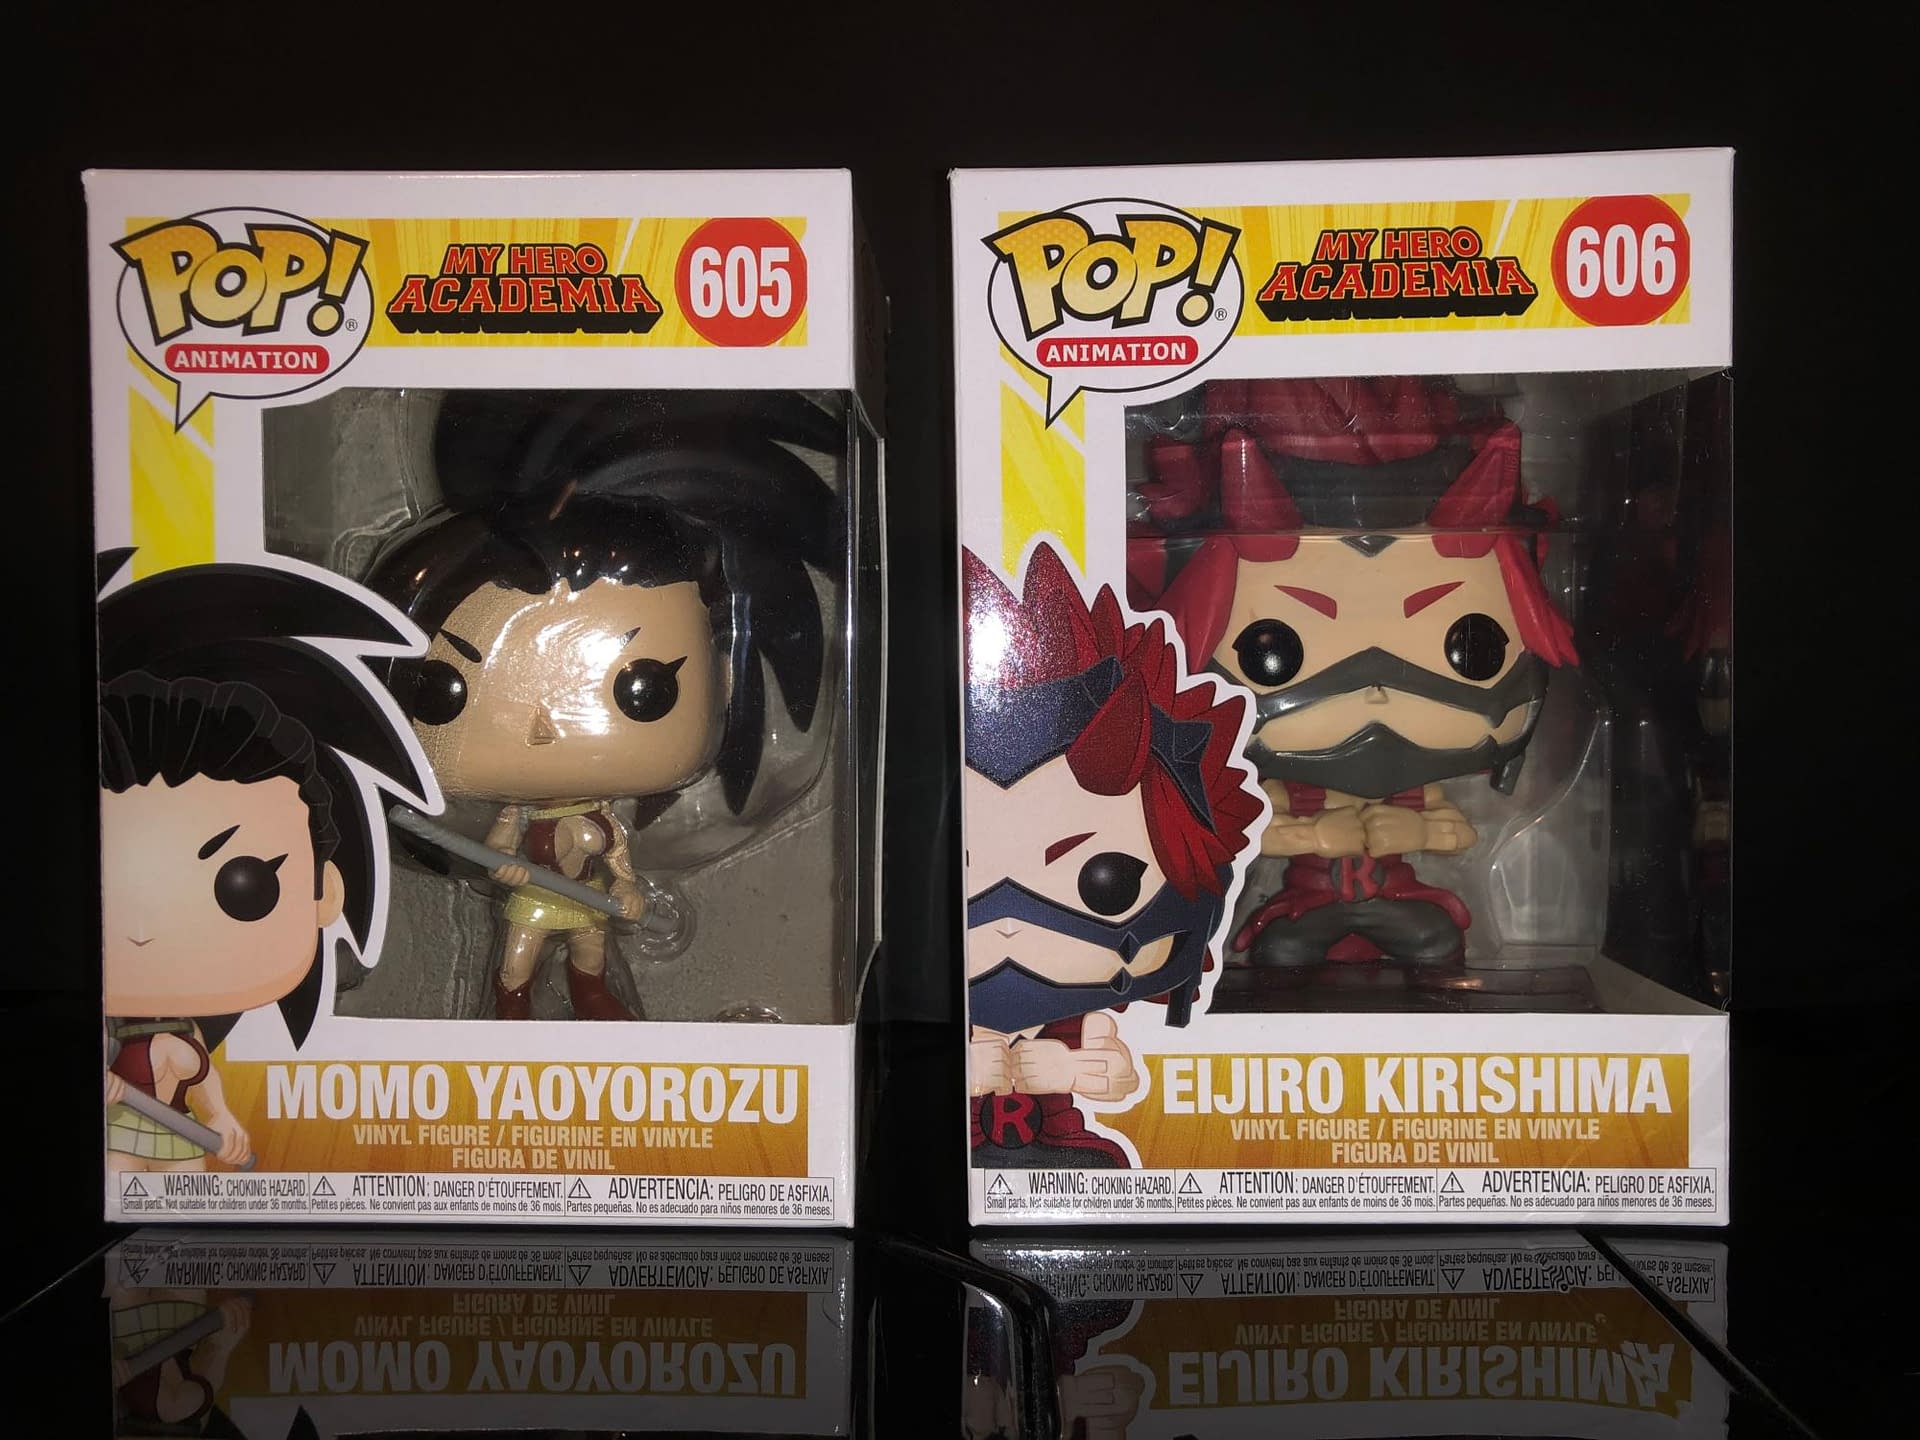 My Hero Academia Class 1A and Pro-Hero Funko Pops Arrive [Review]